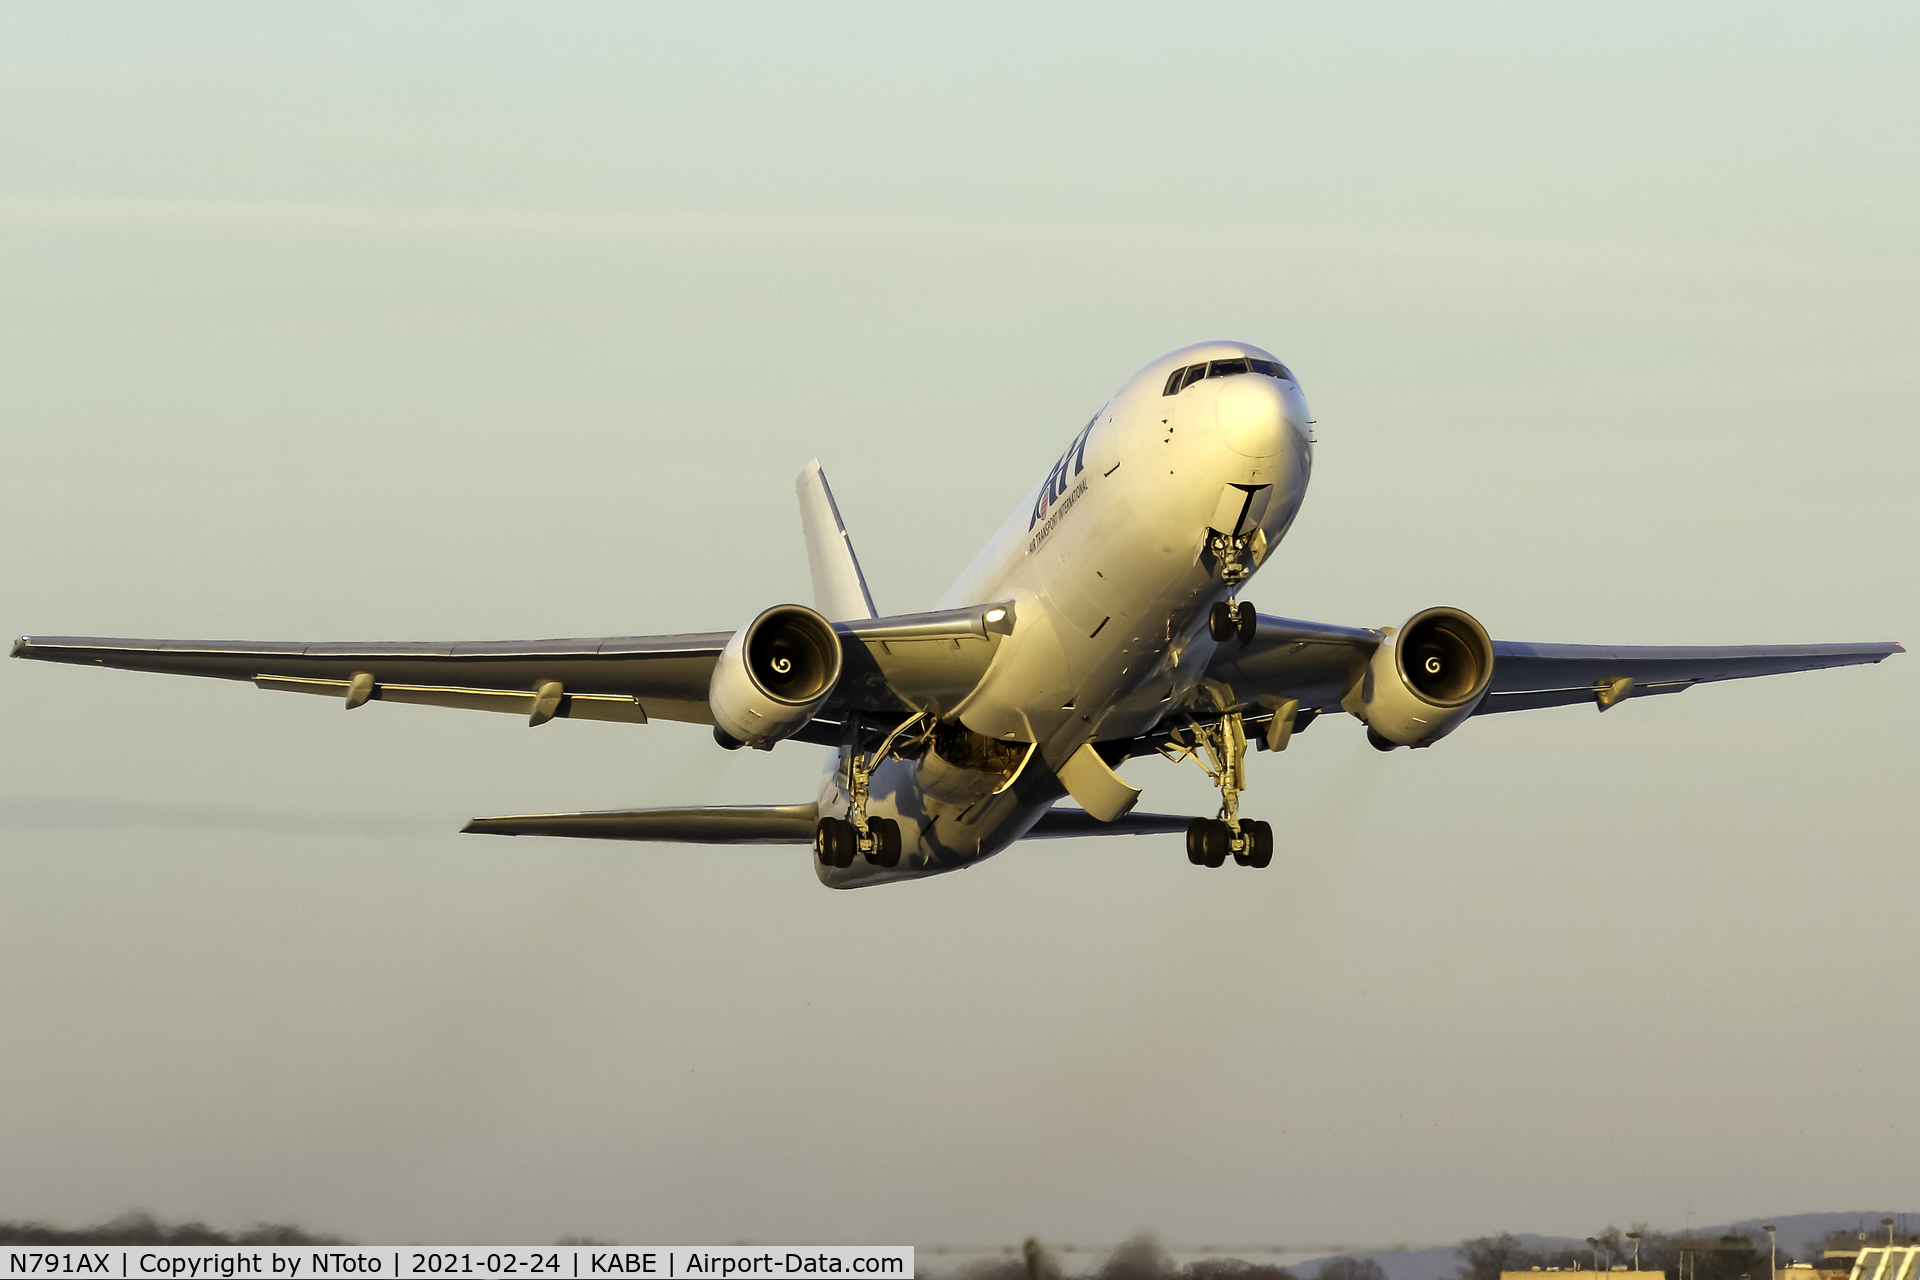 N791AX, 1984 Boeing 767-281 C/N 23141, Departing during golden hour at ABE.